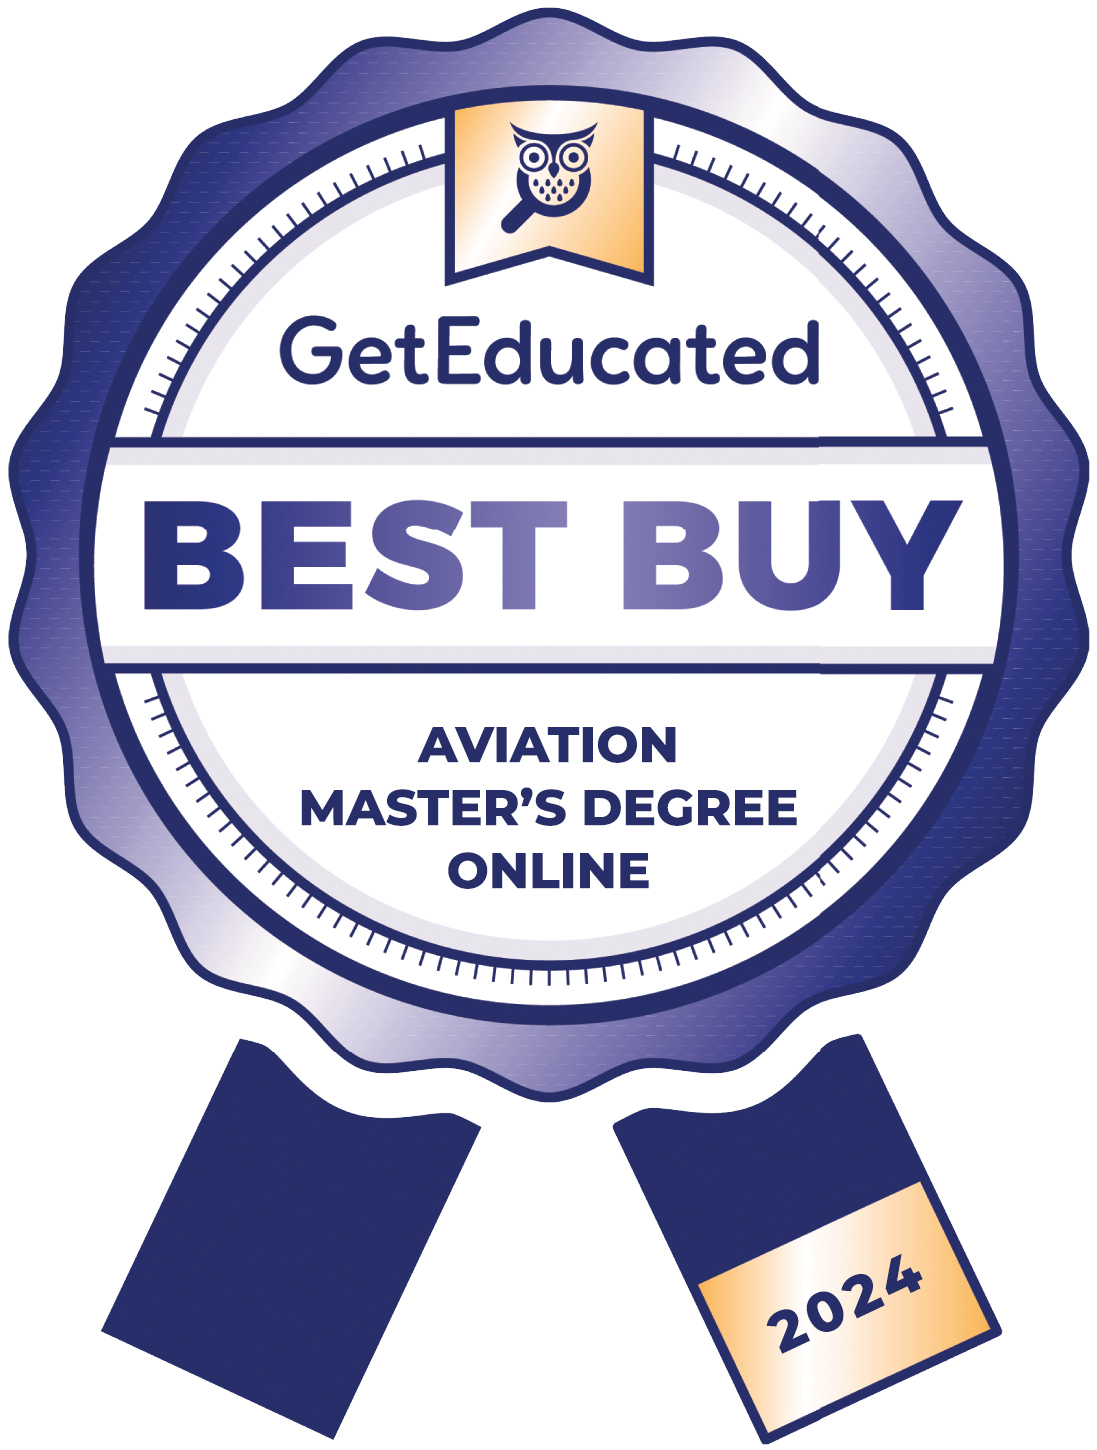 Rankings of the cheapest aviation master's degree online